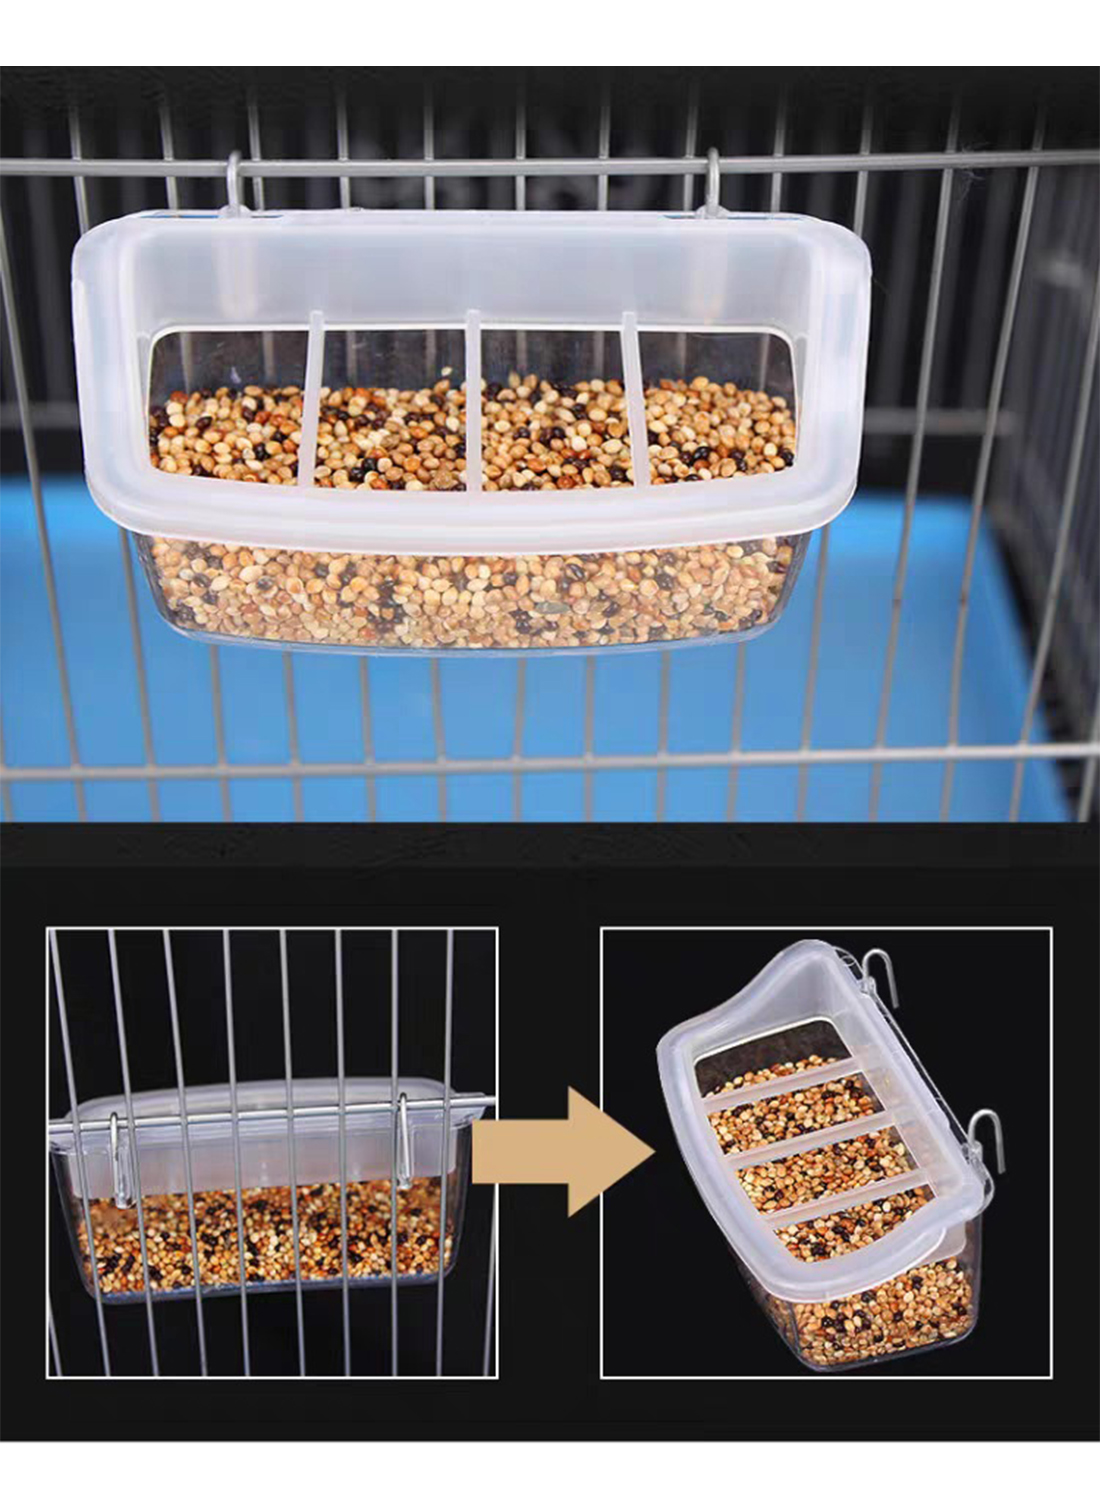 Tiger Cockatoo Small Food Container Bird Feeder Small Bird Spill Resistant Splash Resistant Hanging Food Bowl